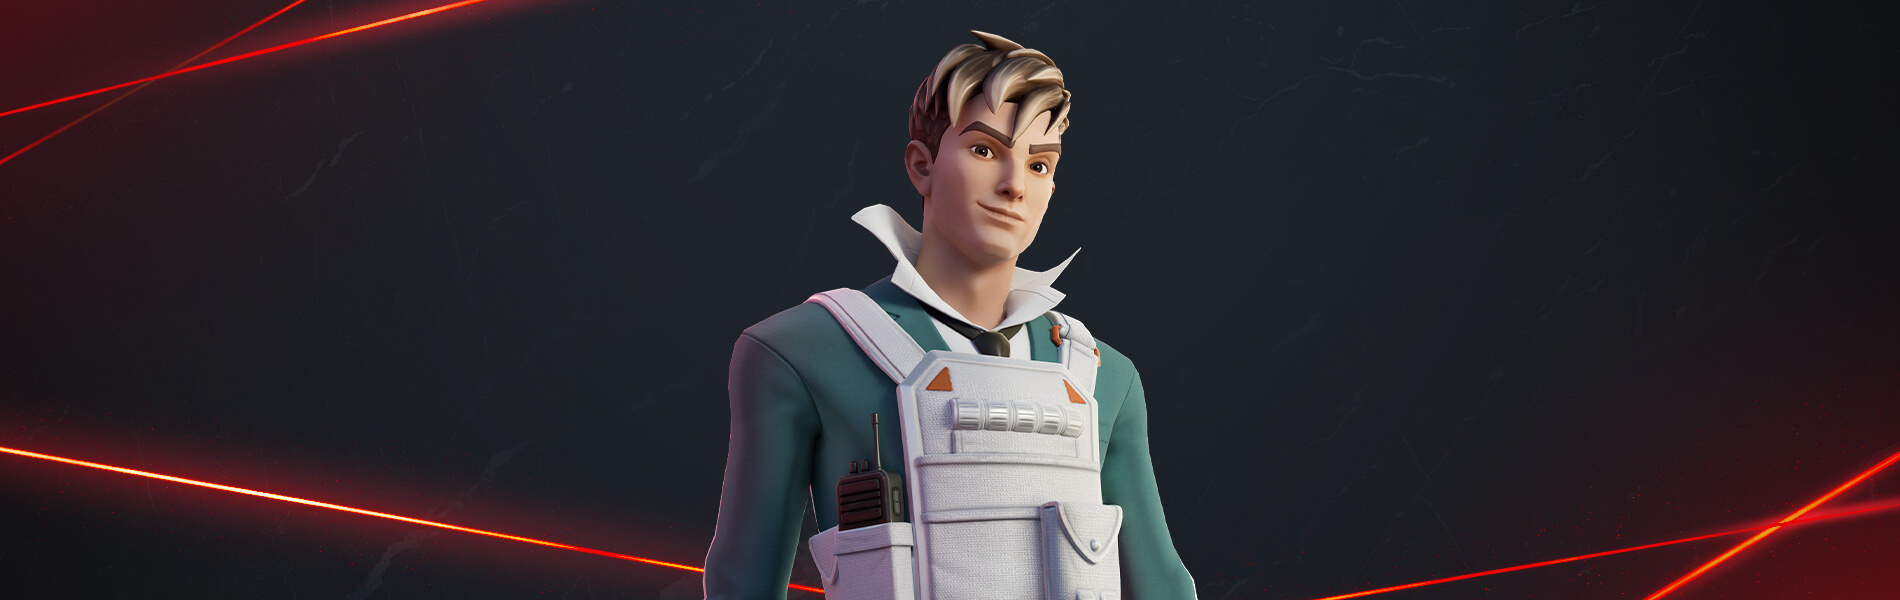 fortnite-nolan-chance-outfit-1900x600-bc5fc4ed3188